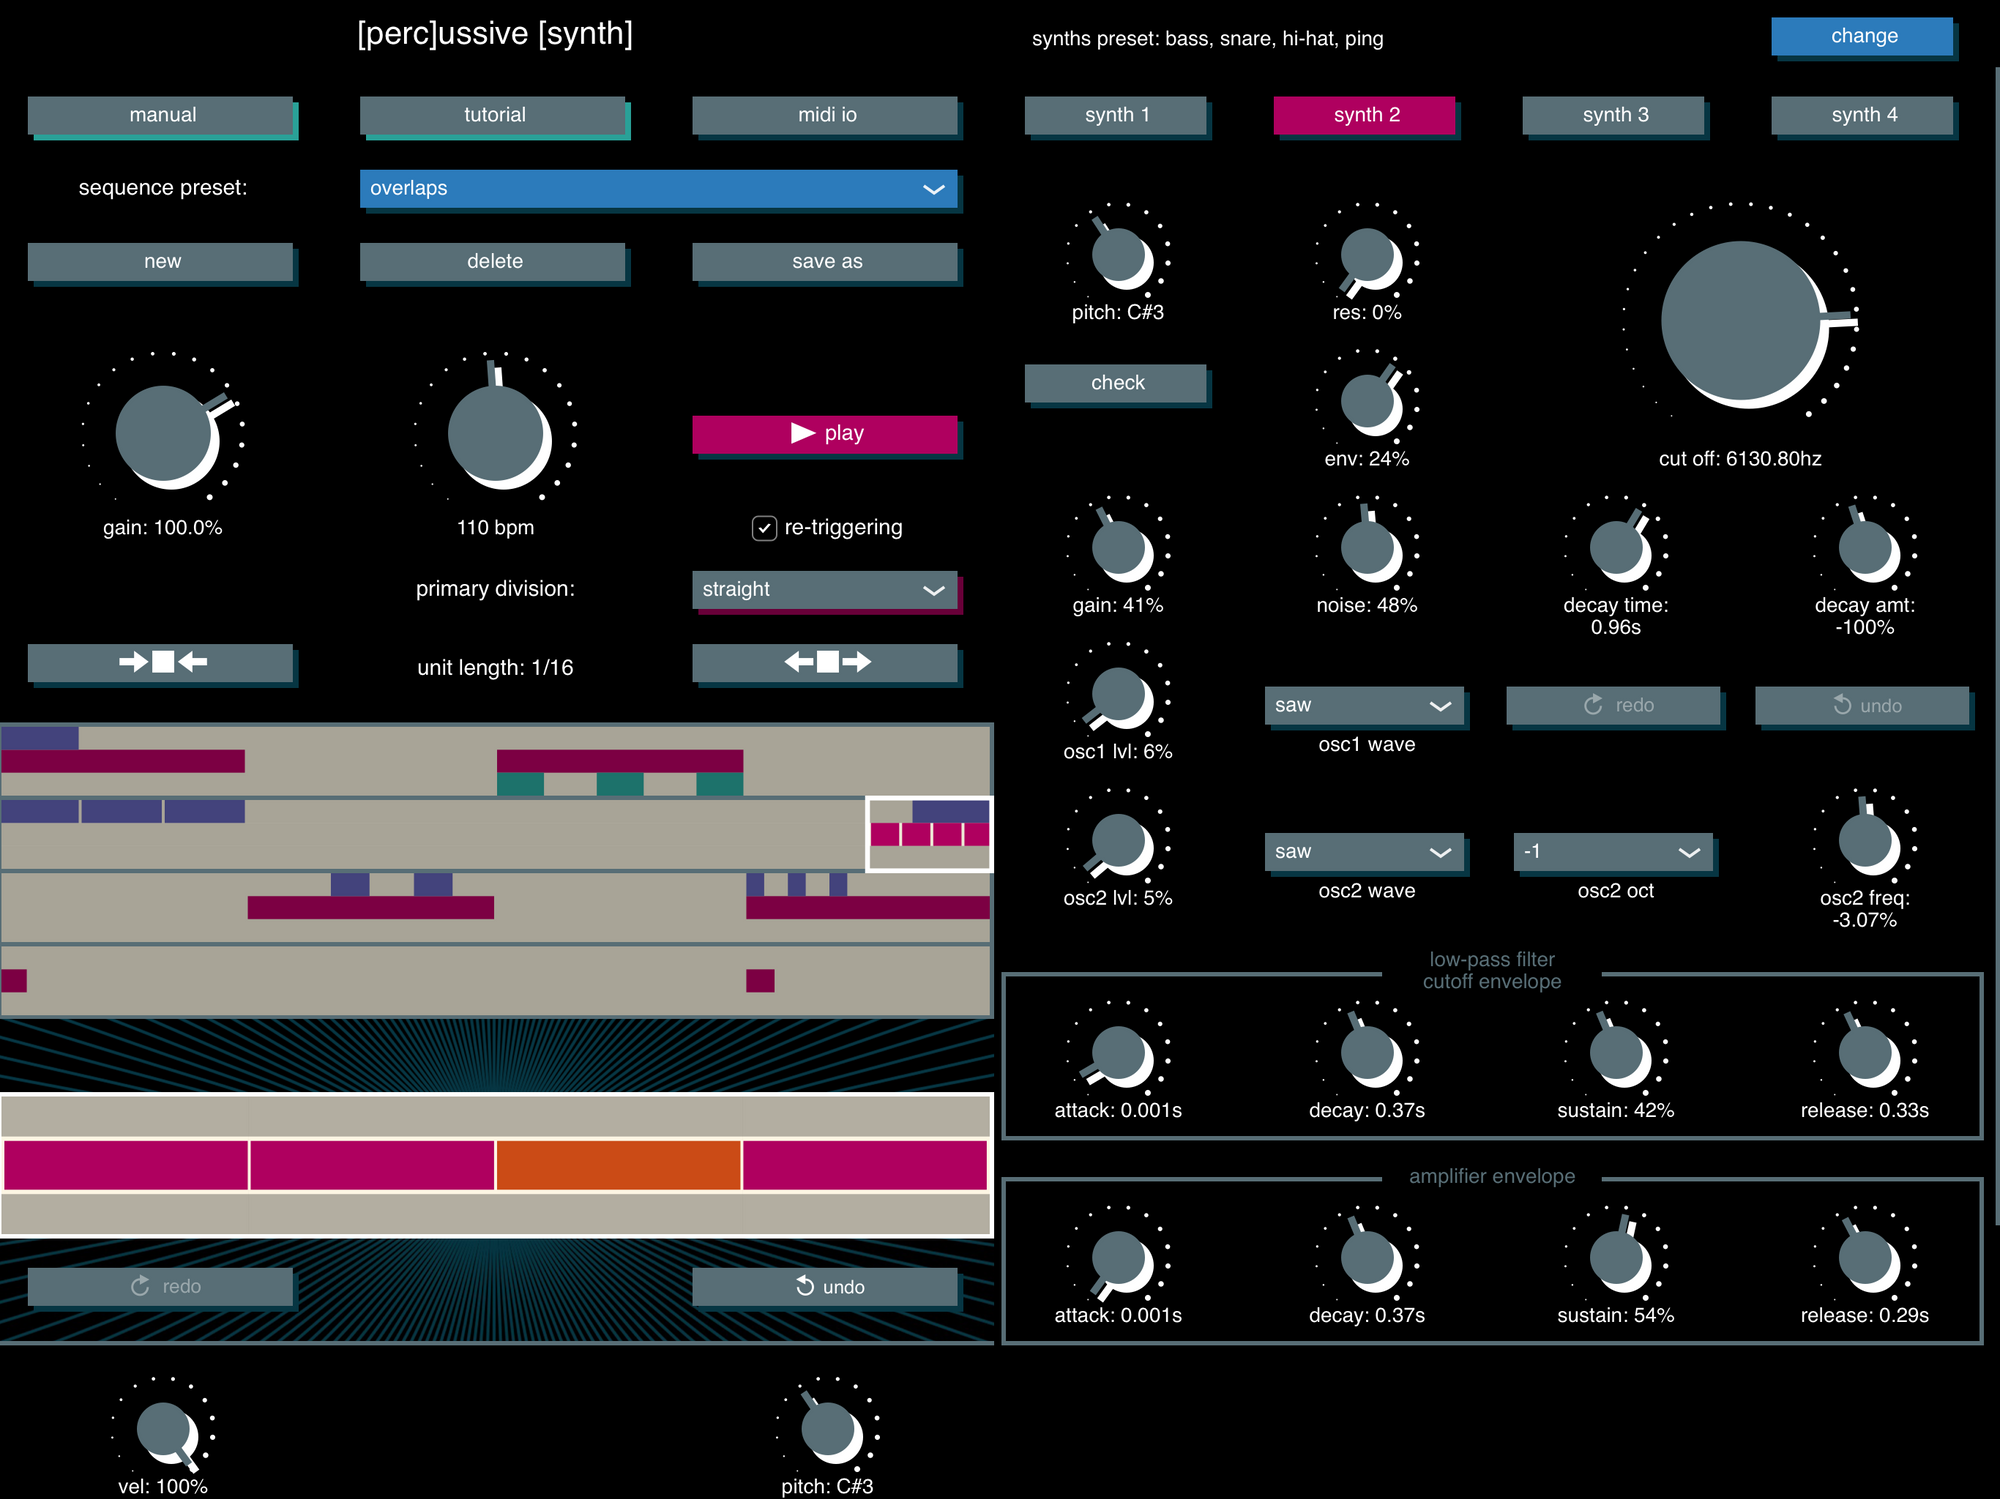 Percussive Synth release v1.2: Changelog